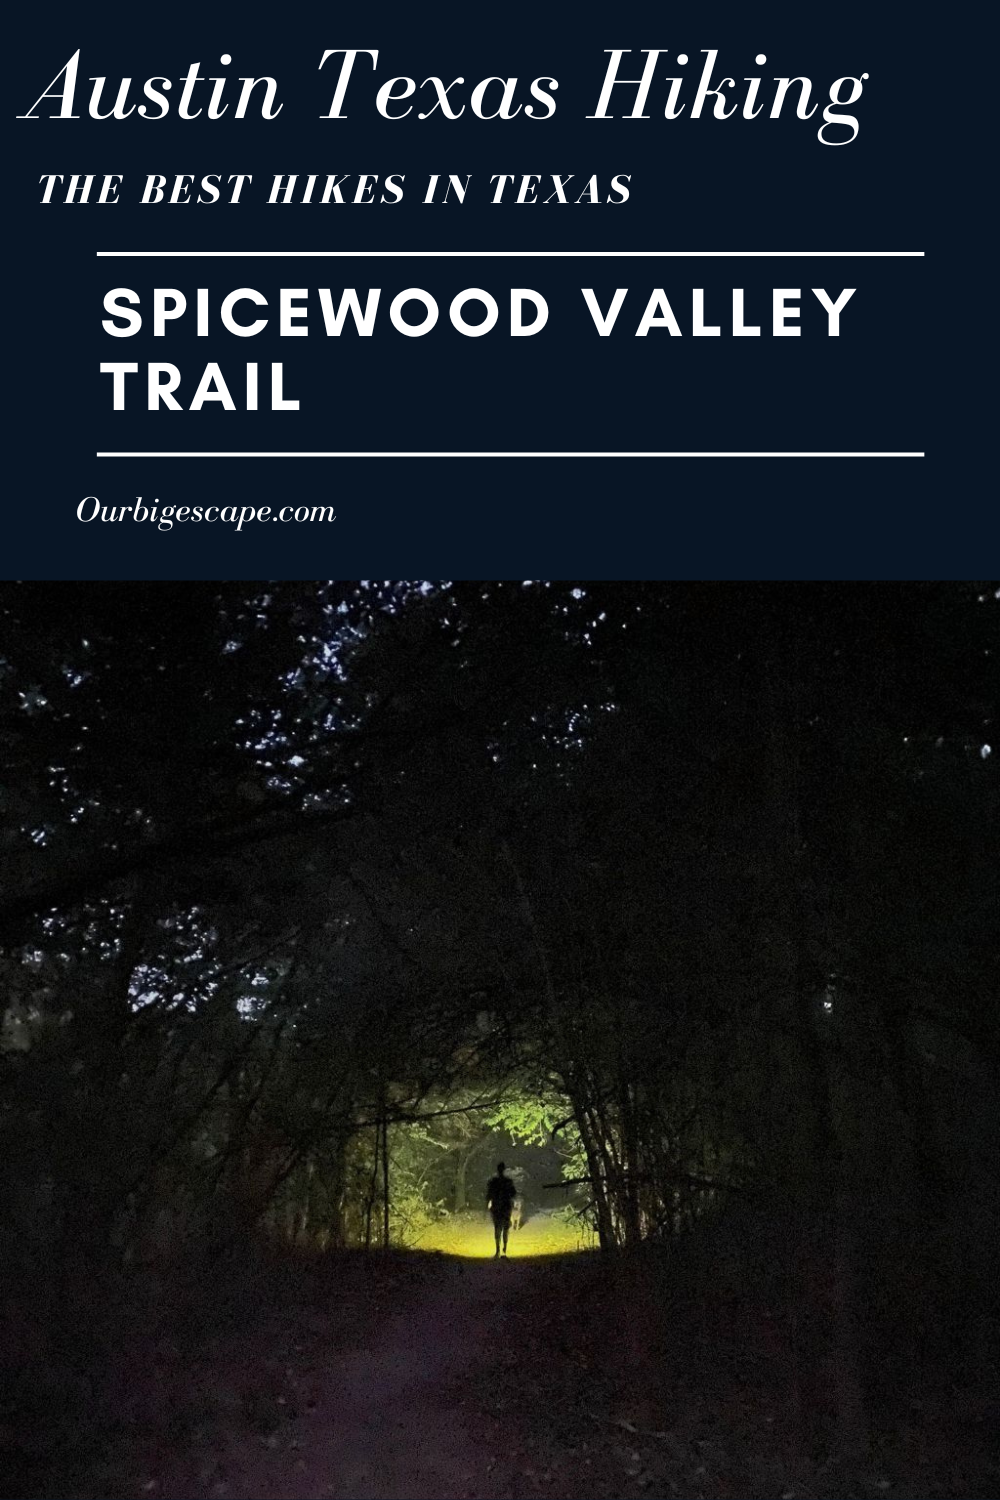 Spicewood Valley Trail